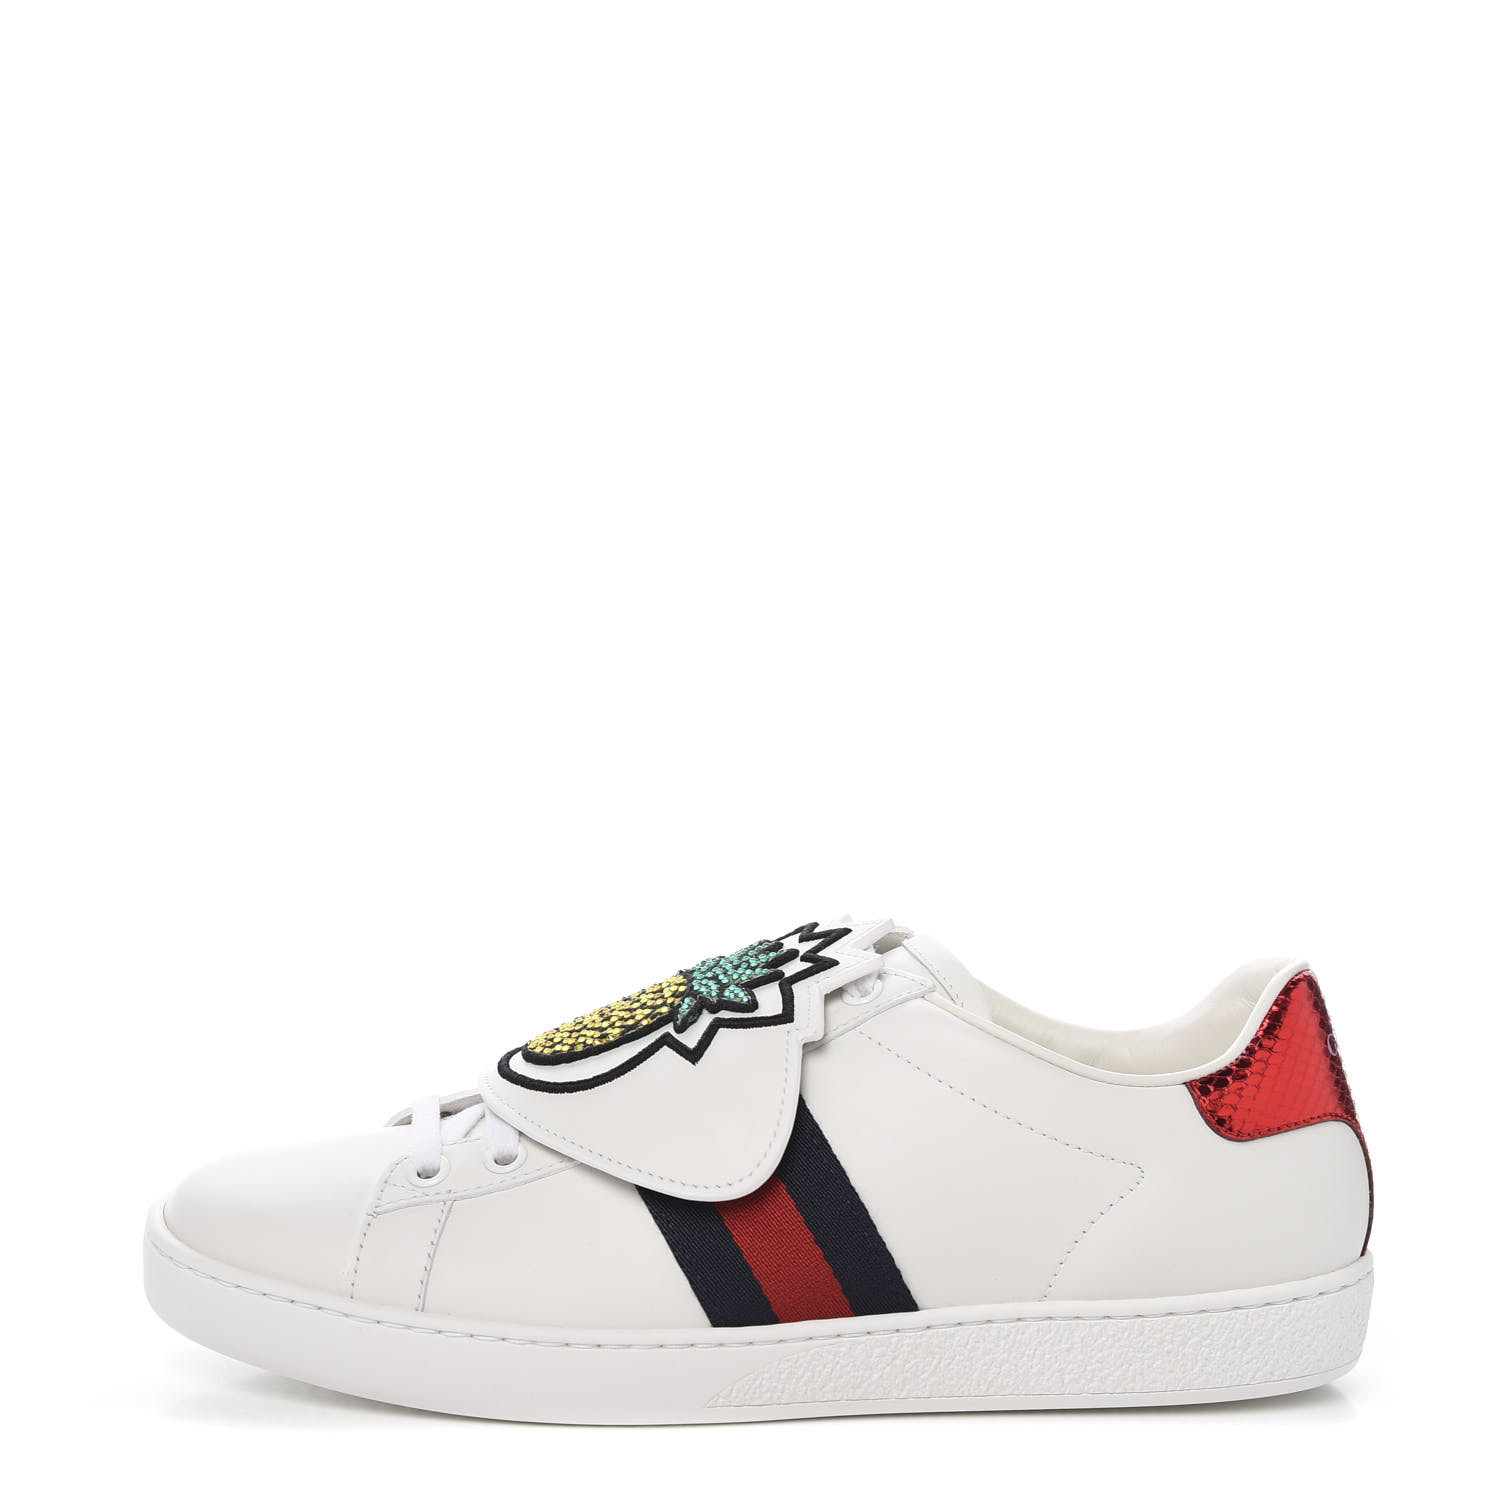 gucci sneakers pineapple